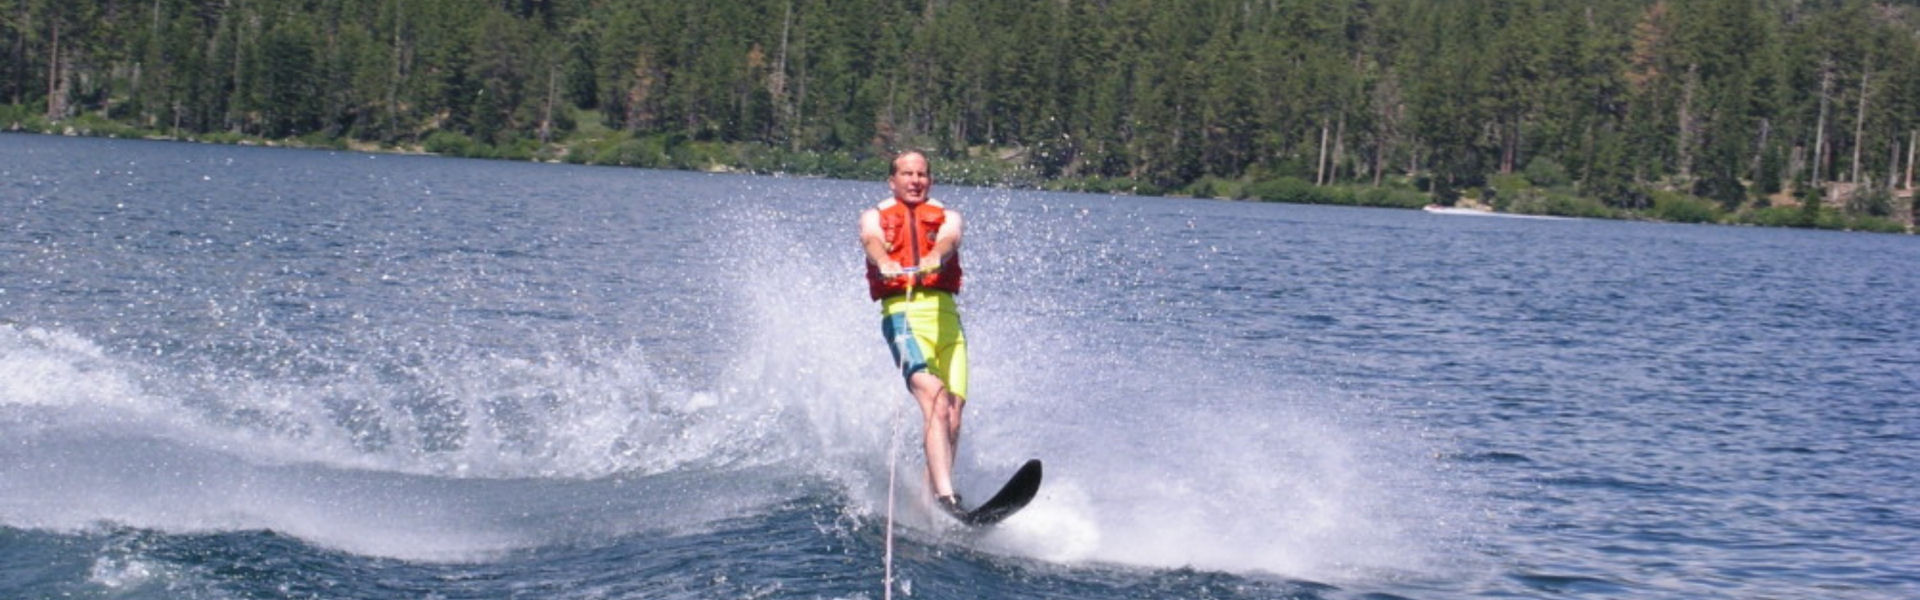 Mike waterskiing after surgery